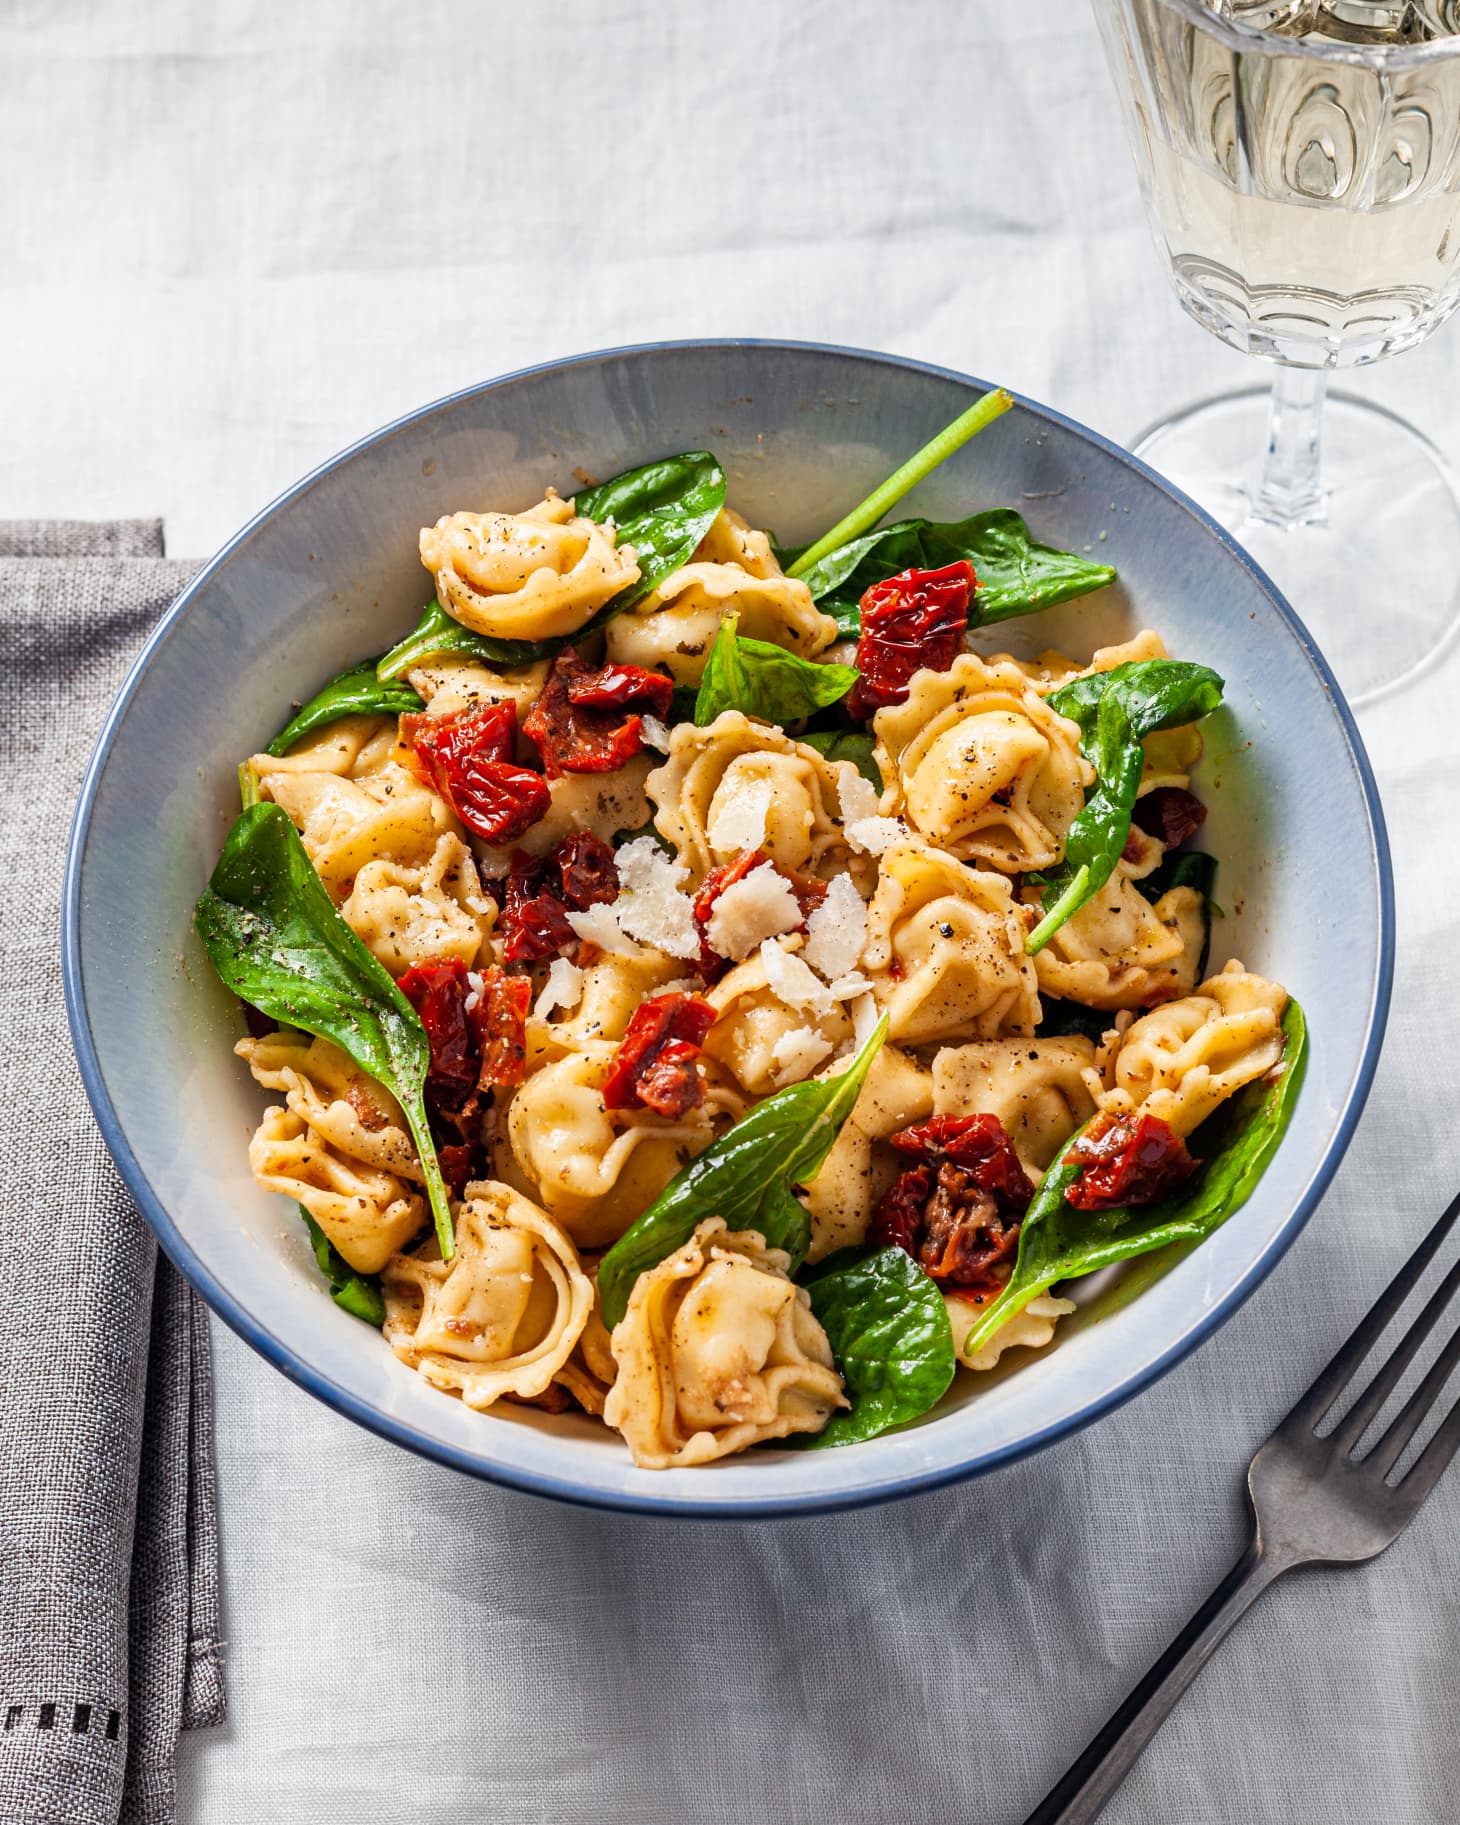 Tuscan Tortellini Salad with Spinach and Sun-Dried Tomatoes | Kitchn